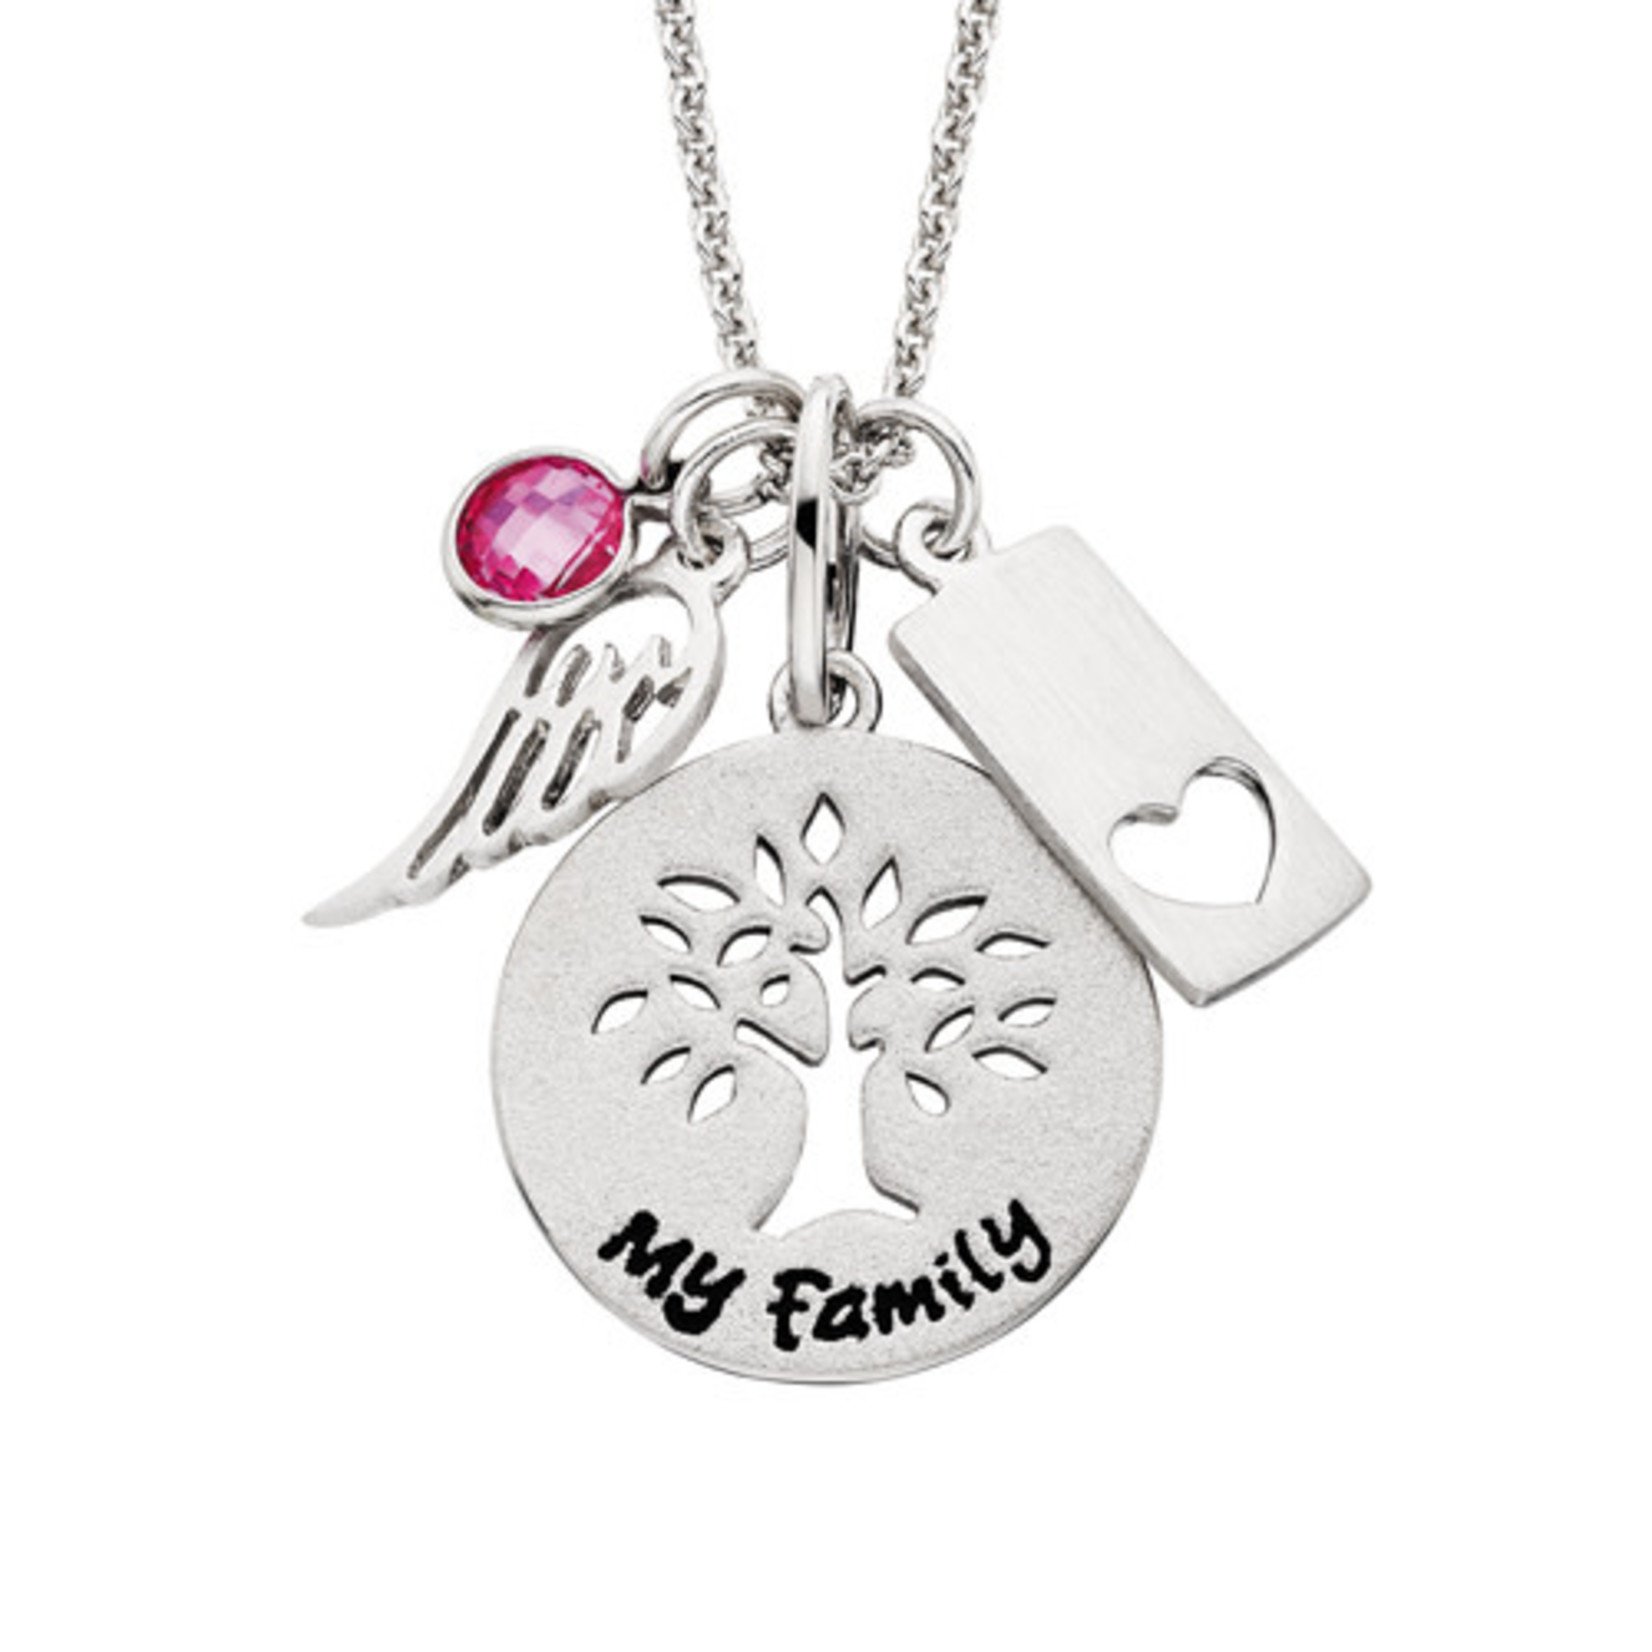 THE BERCO COMPANY, INC. Sterling Silver "My Family" Tree Pendant